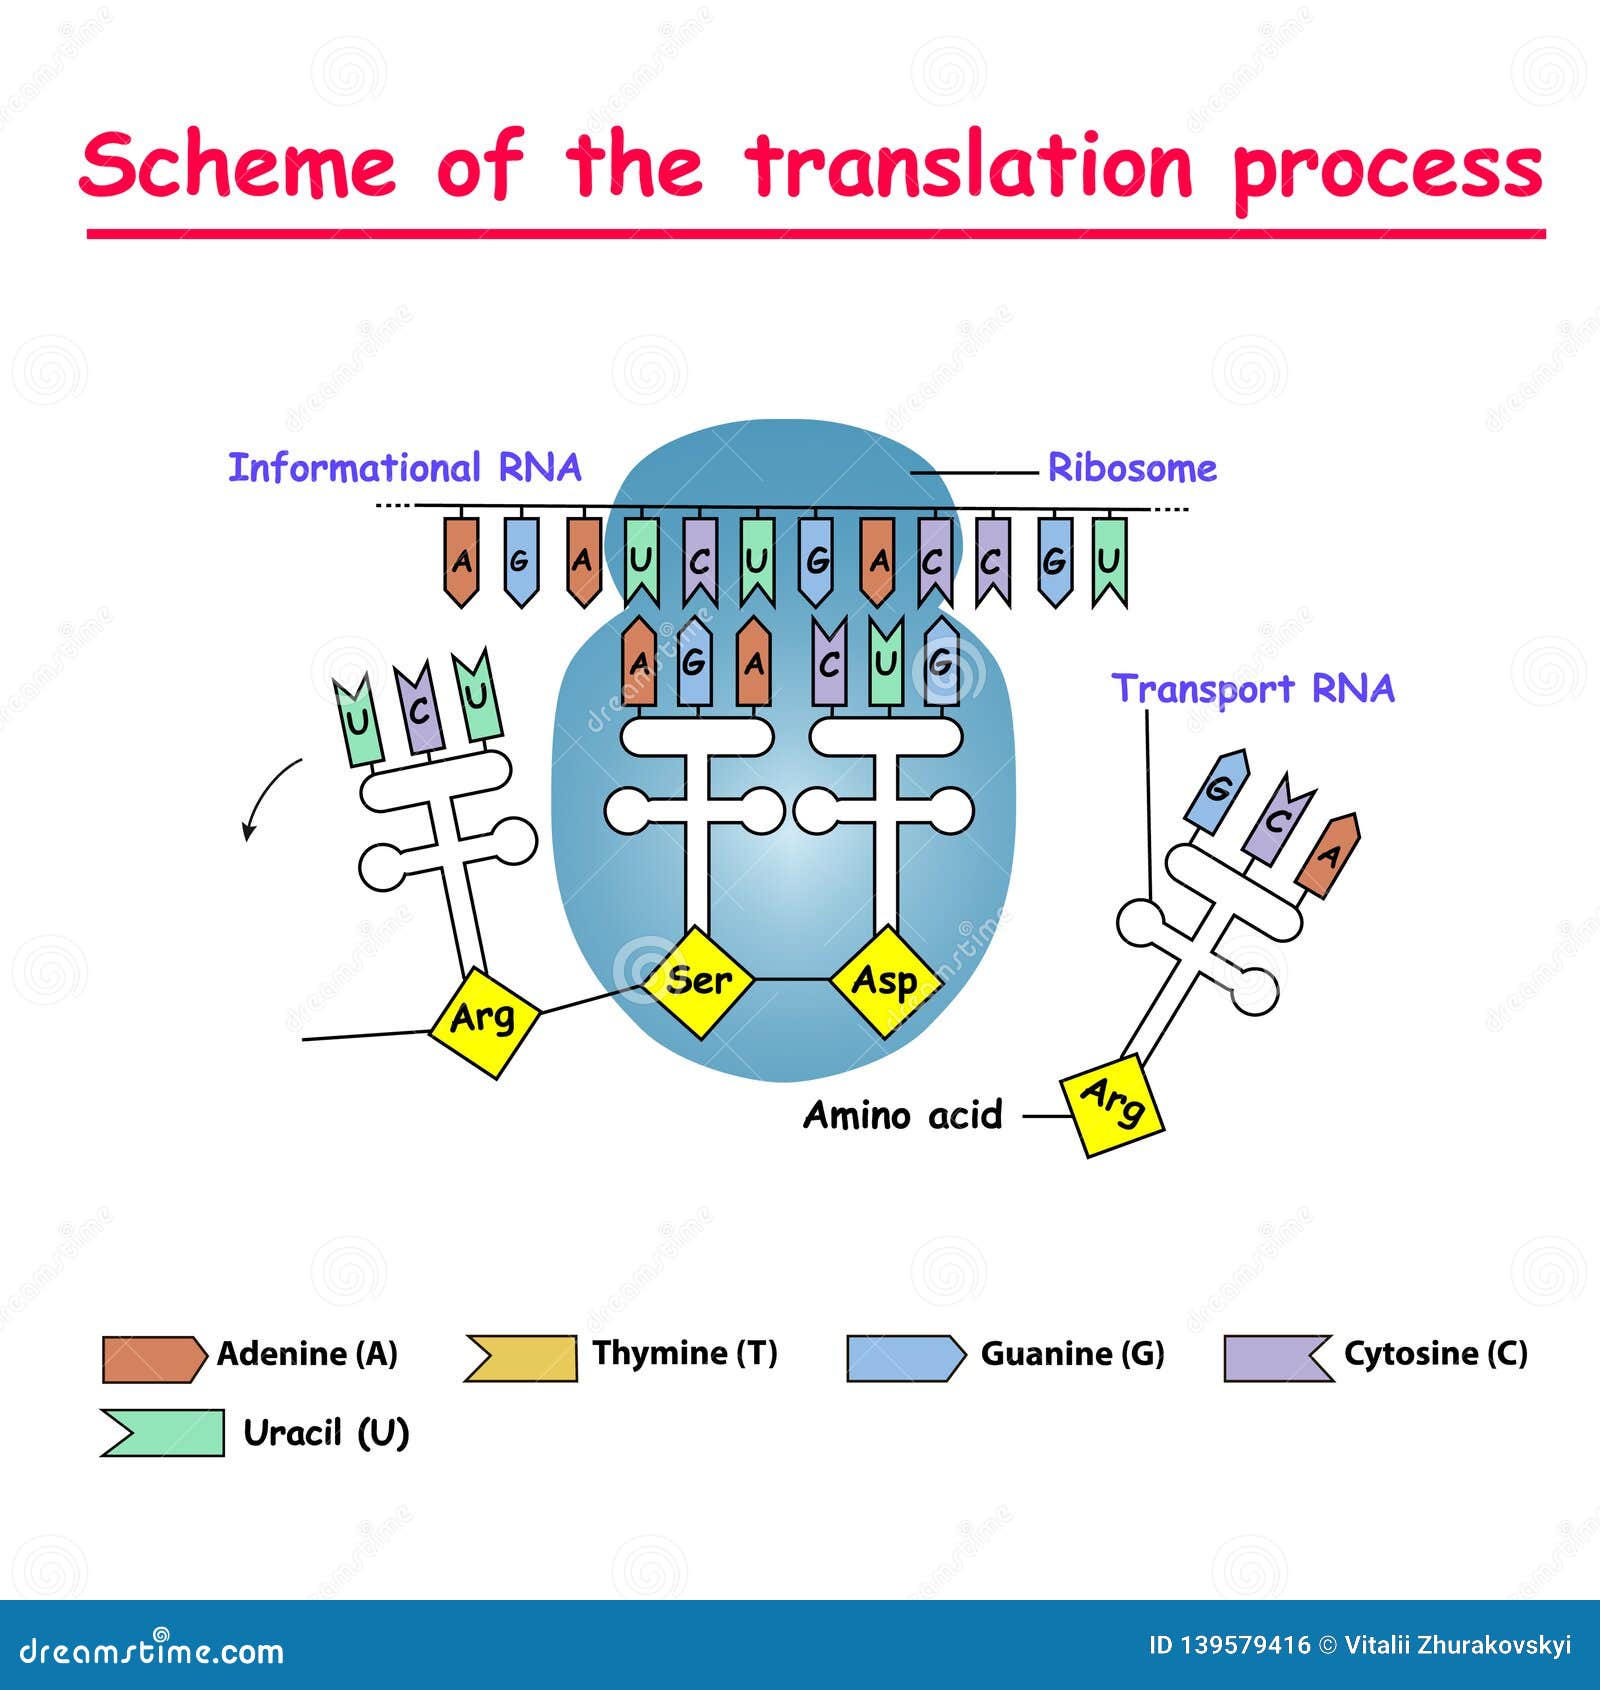 scheme of the translation process. syntesis of mrna from dna in the nucleus. the mrna decoding ribosome by binding of complementa